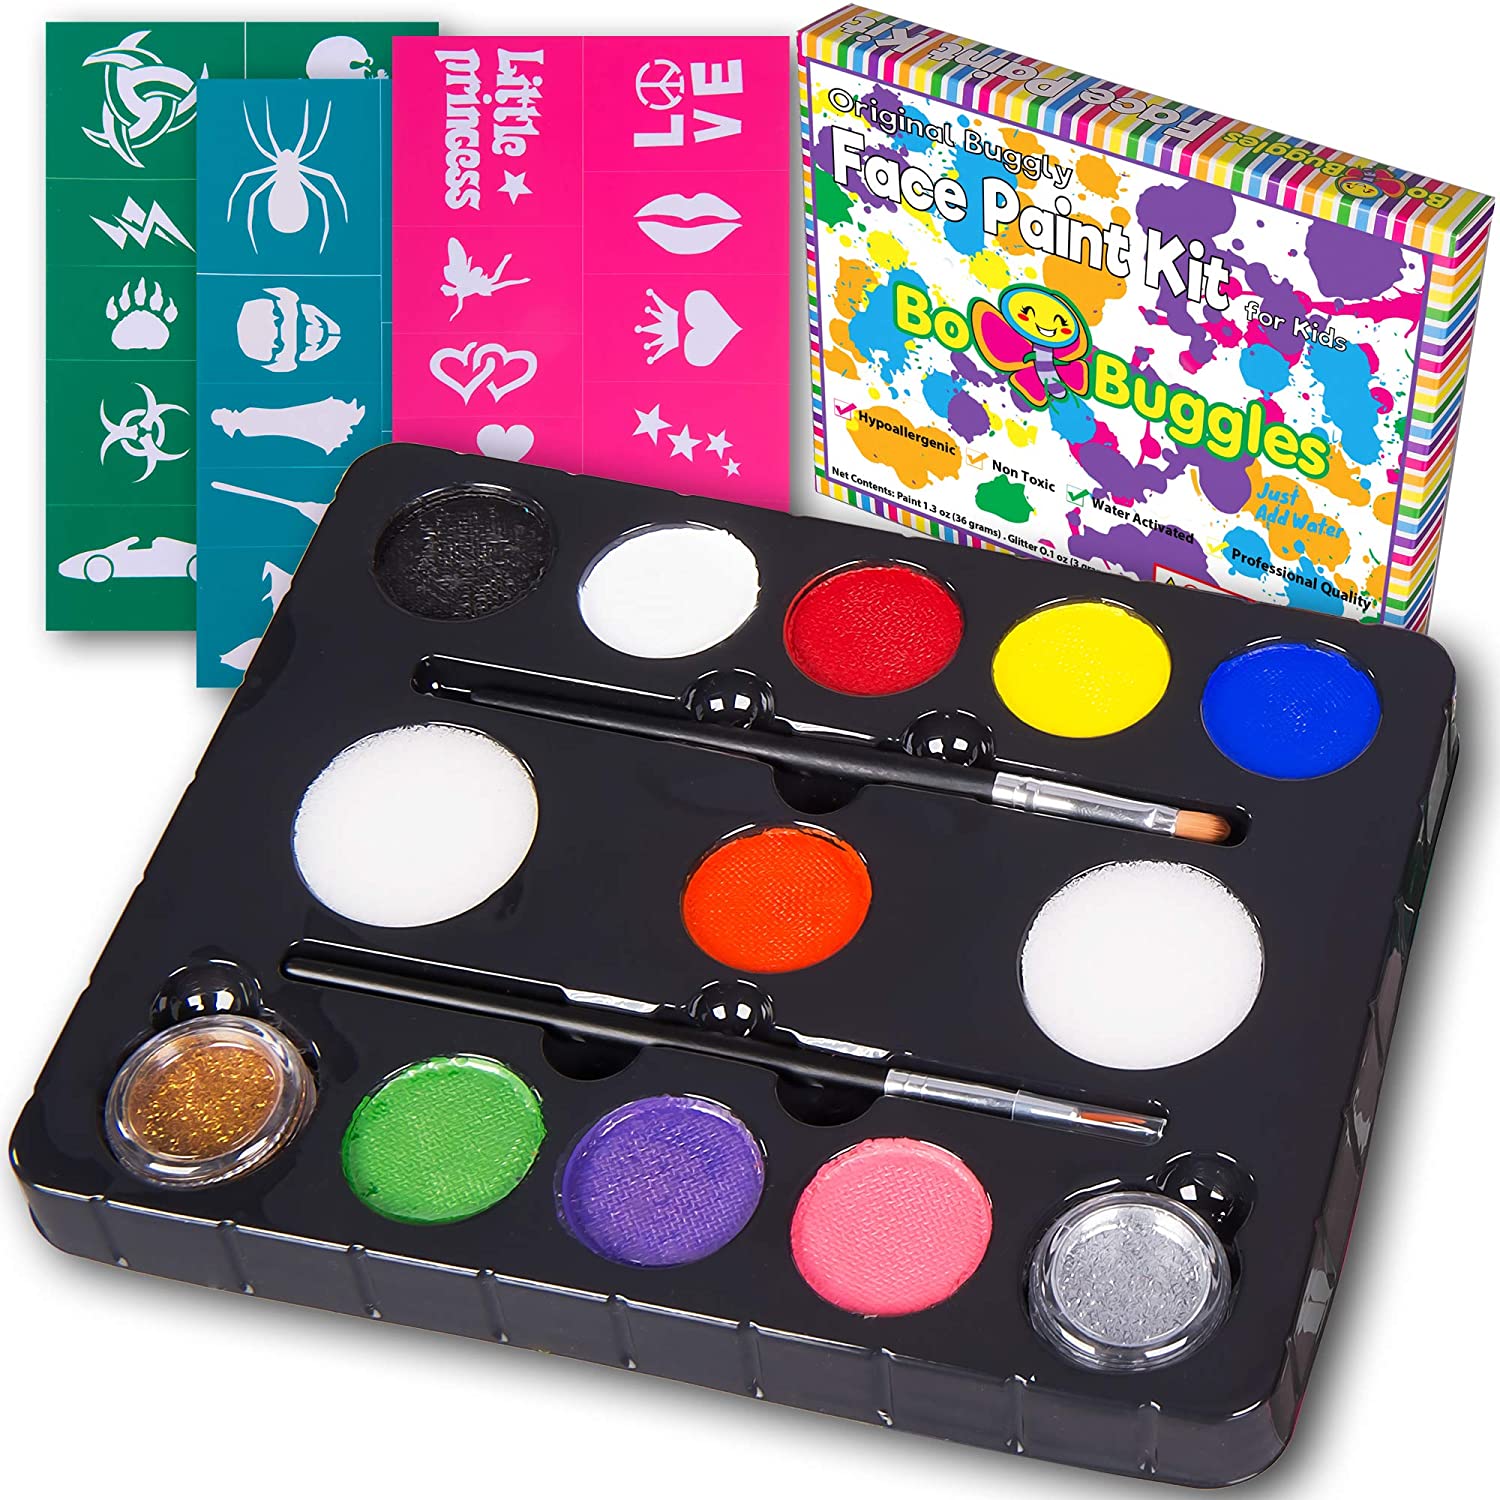 Bo Buggles Face Paint Kit with 30 Stencils, 9 Paints + 2 Glitters Original Buggly Kit for Kids